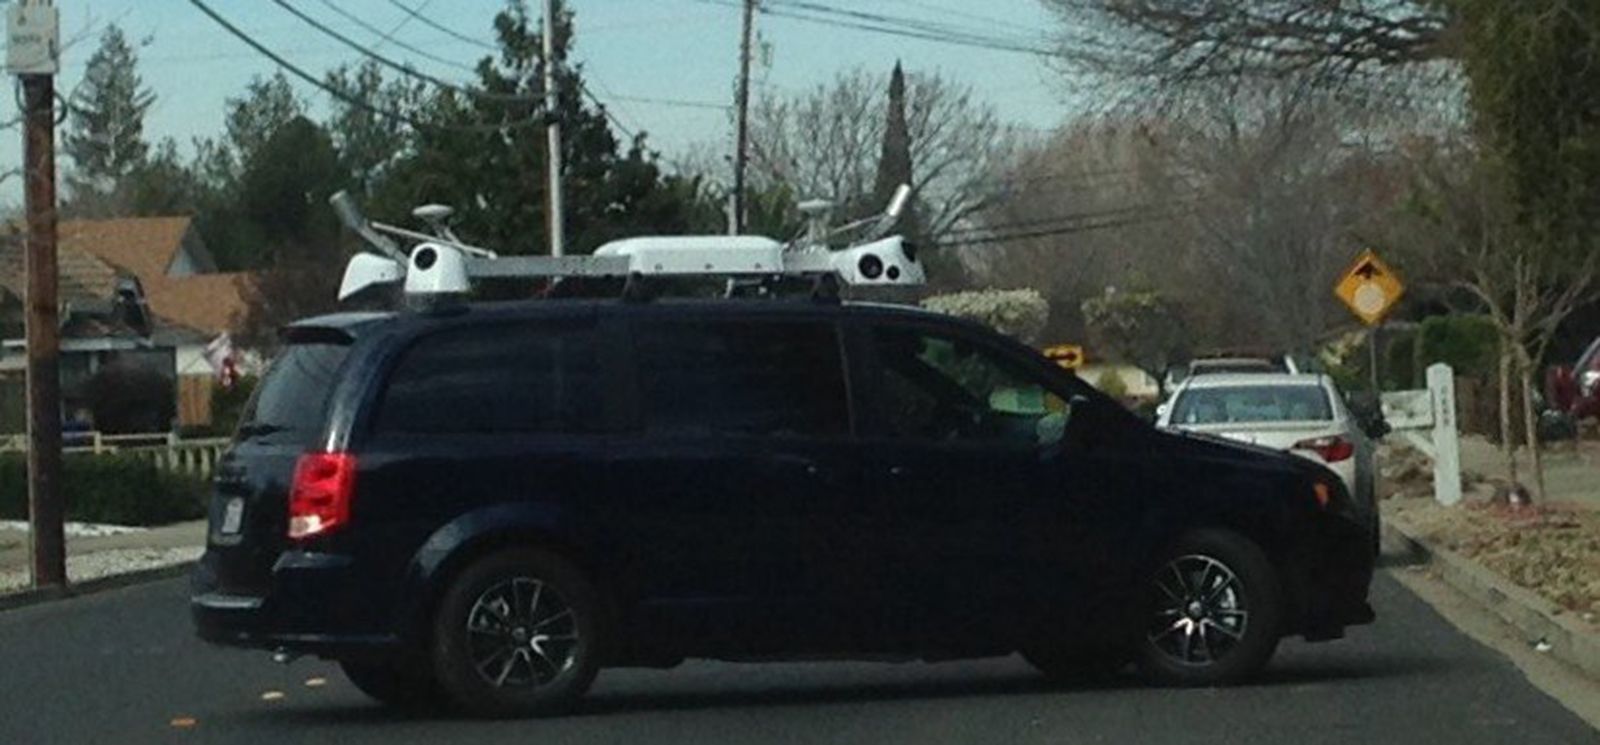 apple camera car spotted snapping in san francisco new apple maps incoming  image 1